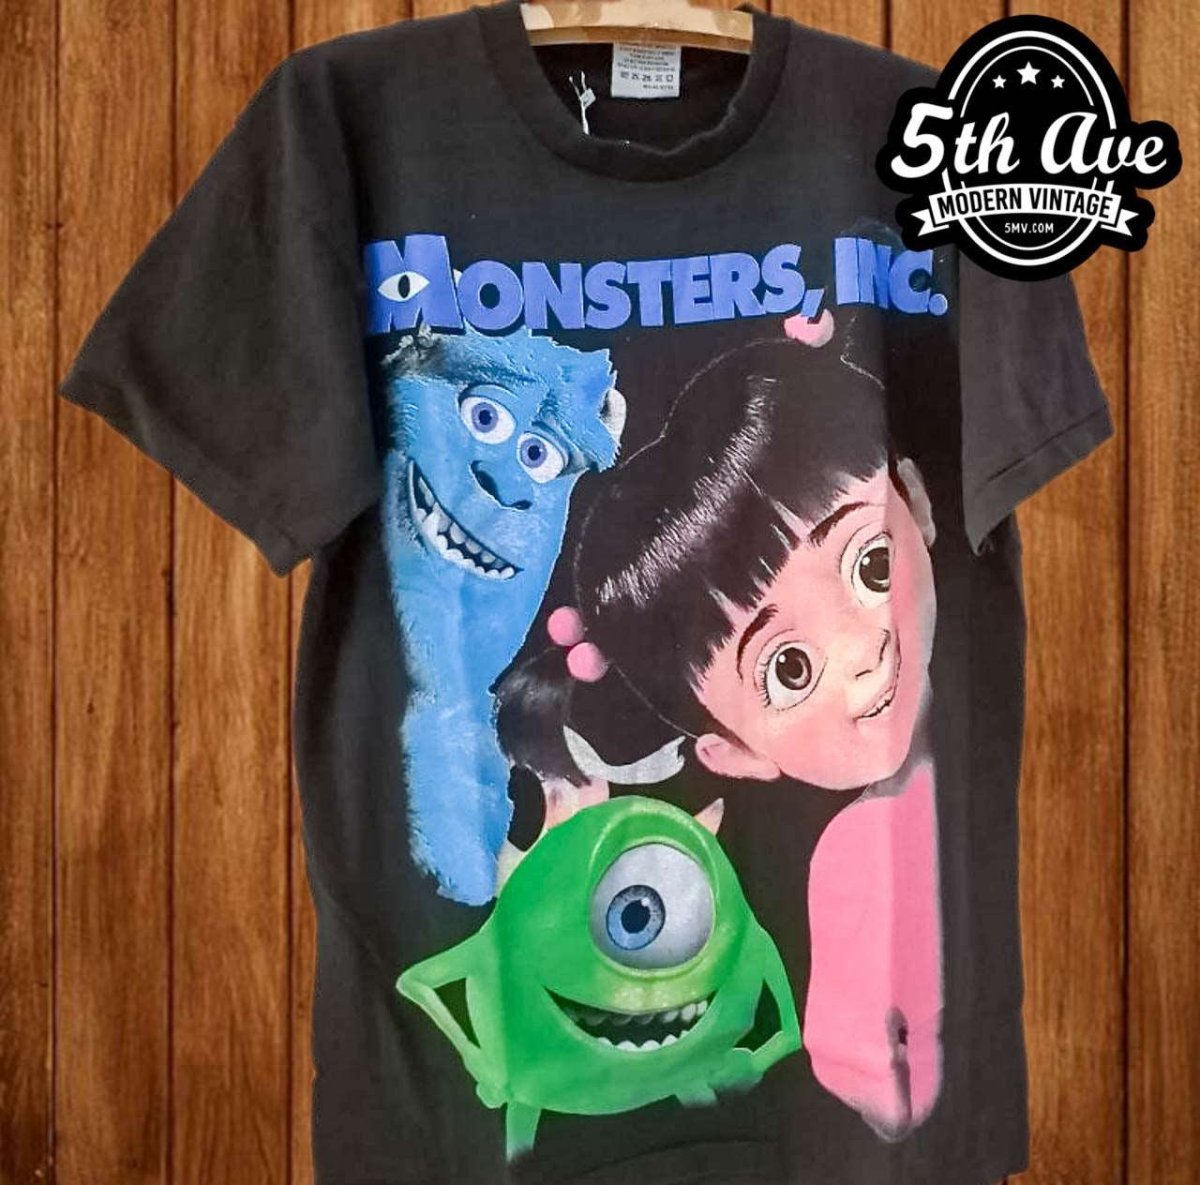 Adventures with Friends: Monsters, Inc. Trio t shirt - Vintage Band Shirts